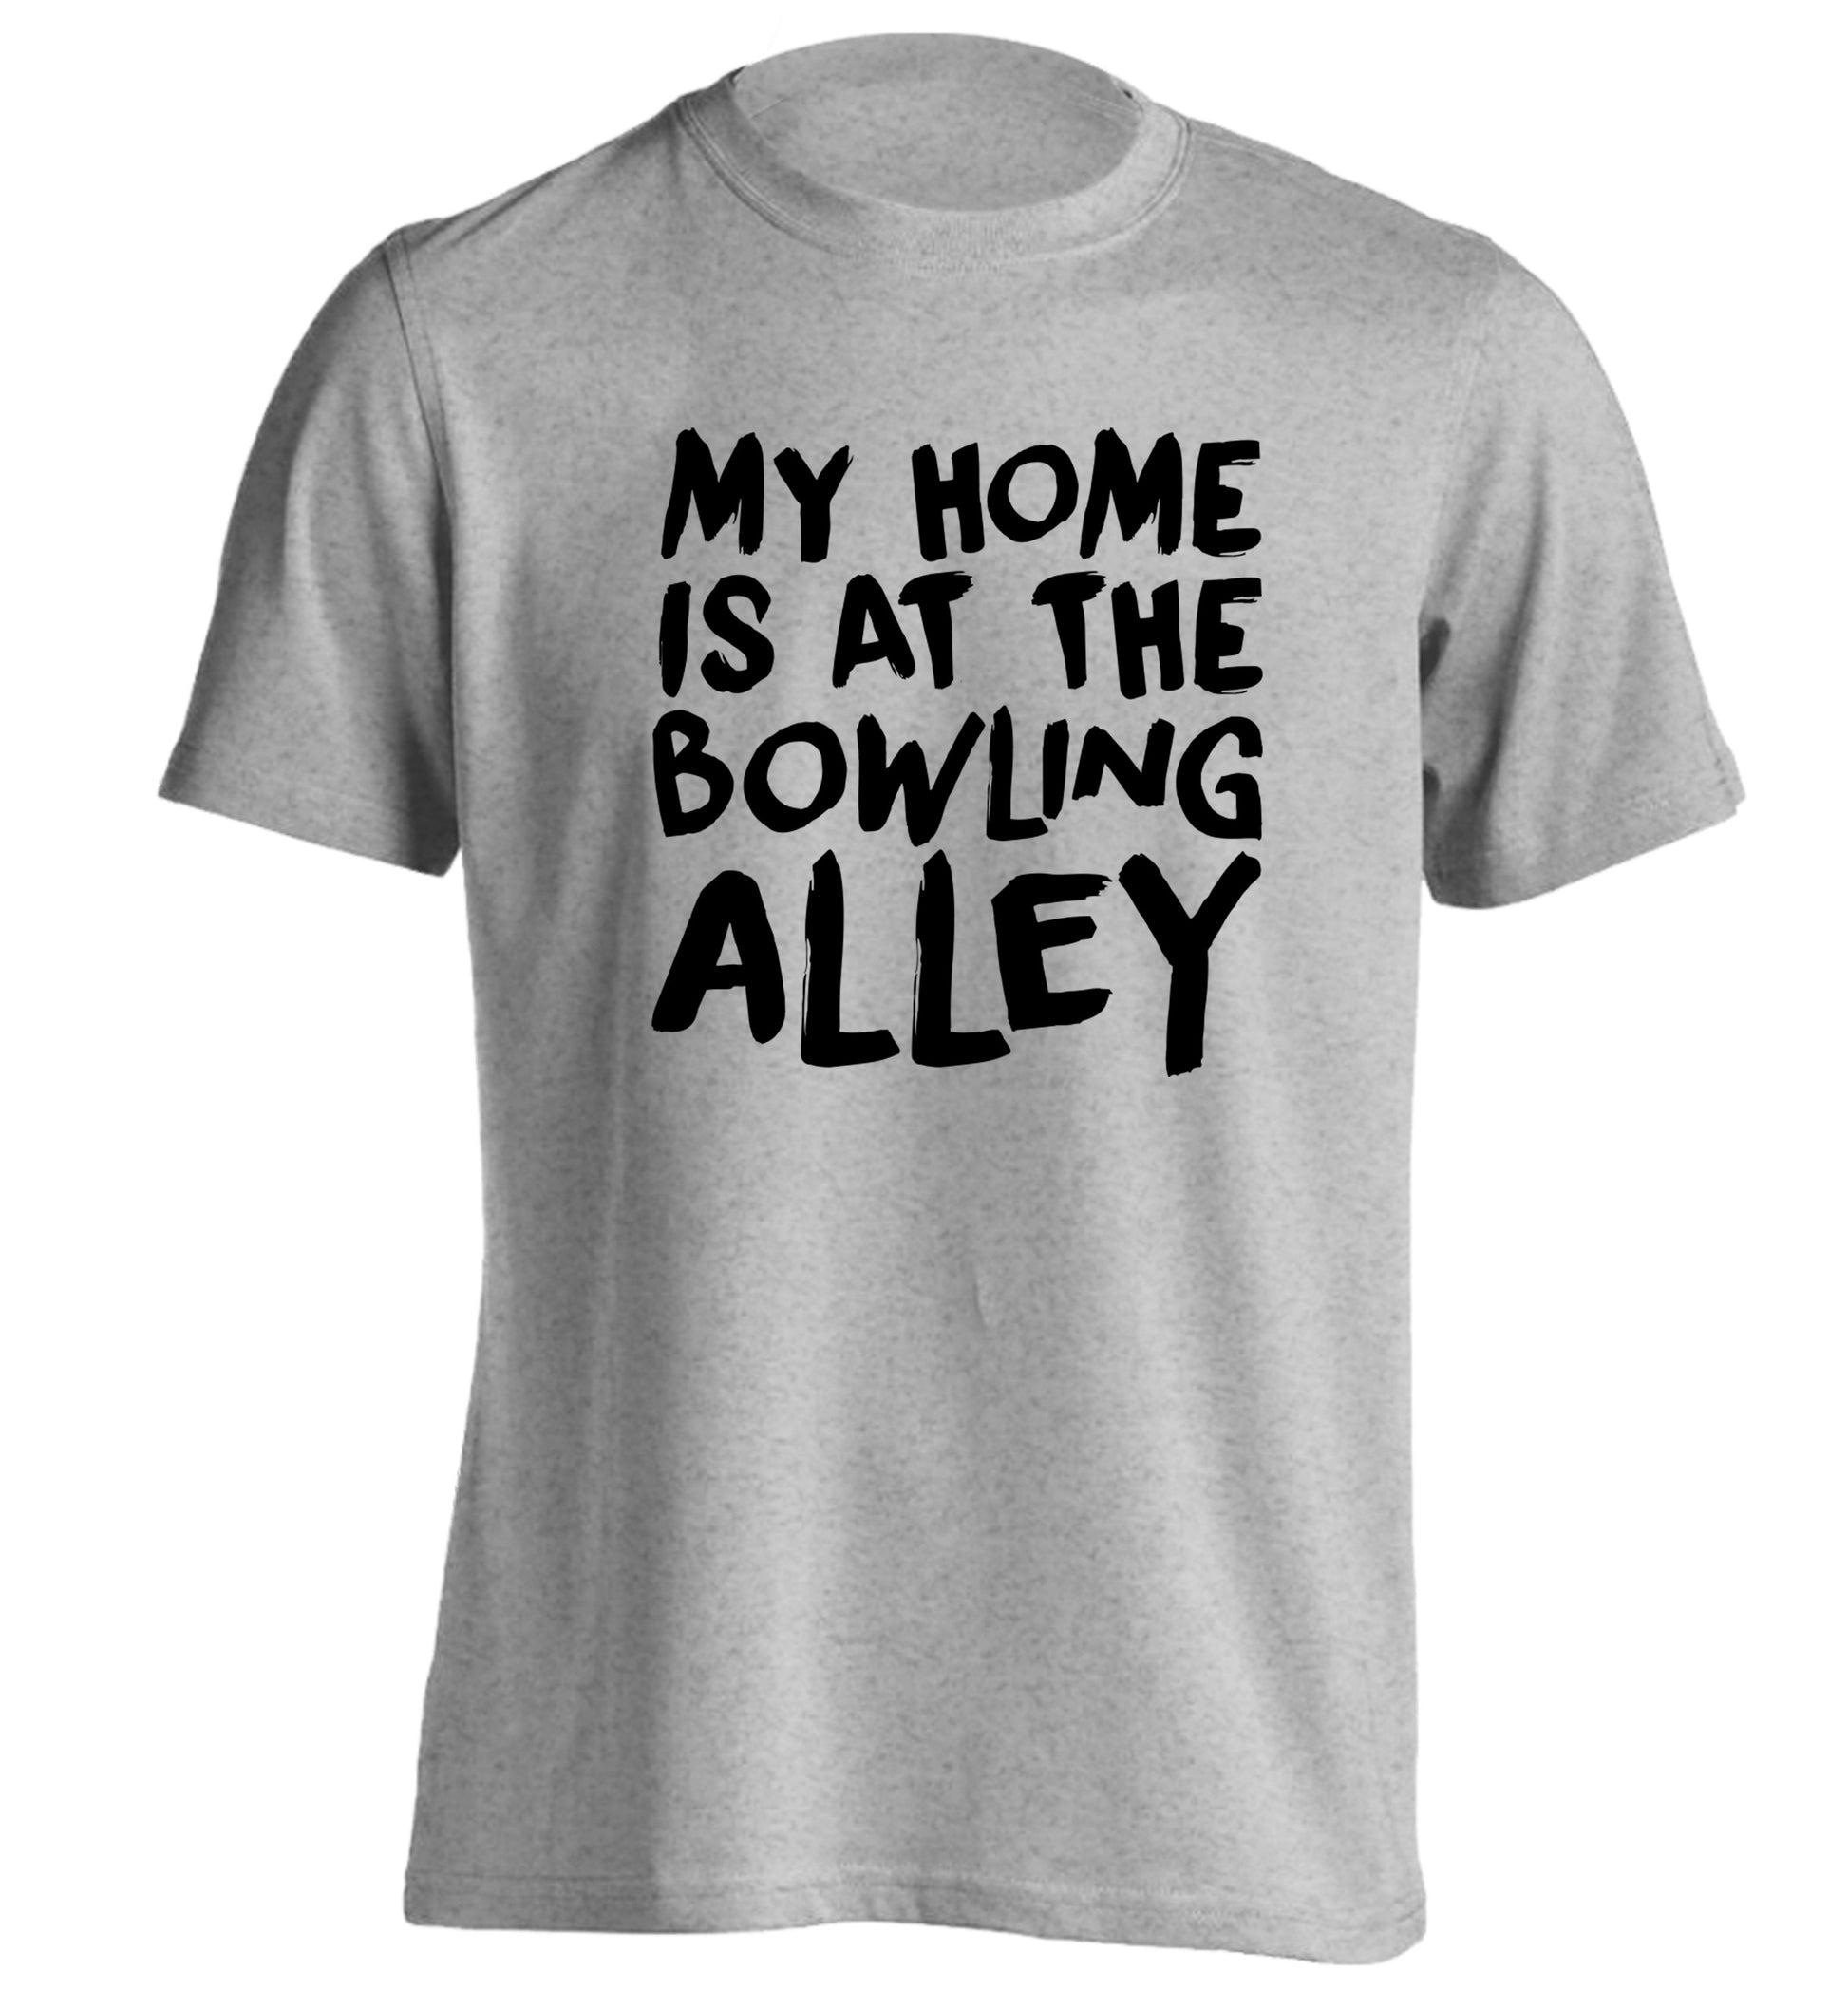 My home is at the bowling alley adults unisex grey Tshirt 2XL